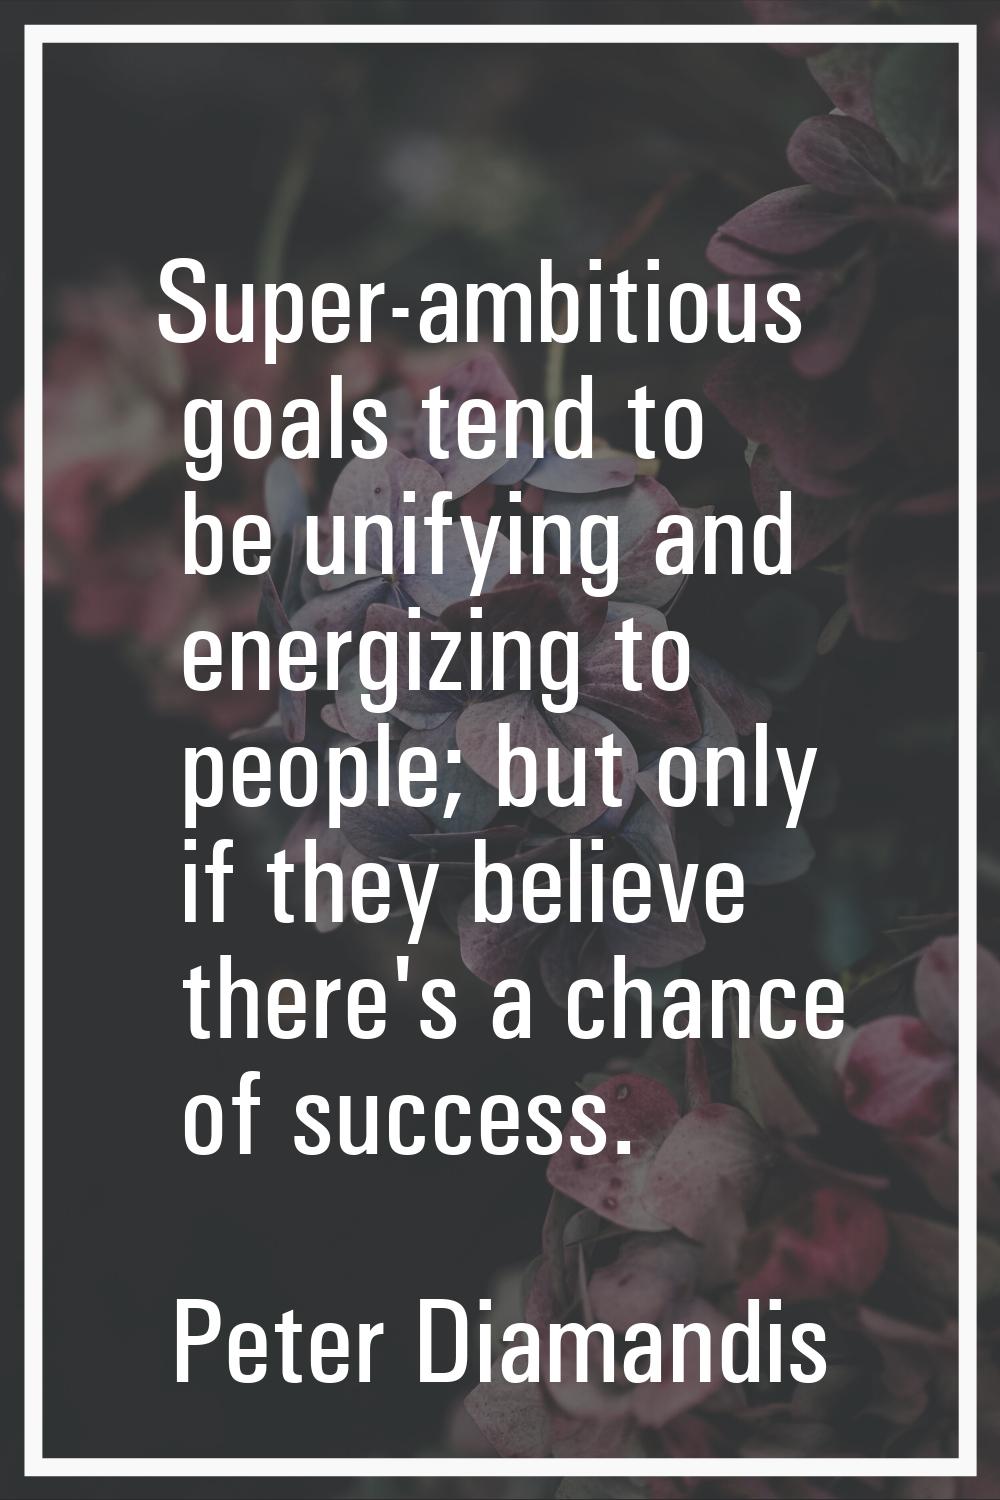 Super-ambitious goals tend to be unifying and energizing to people; but only if they believe there'